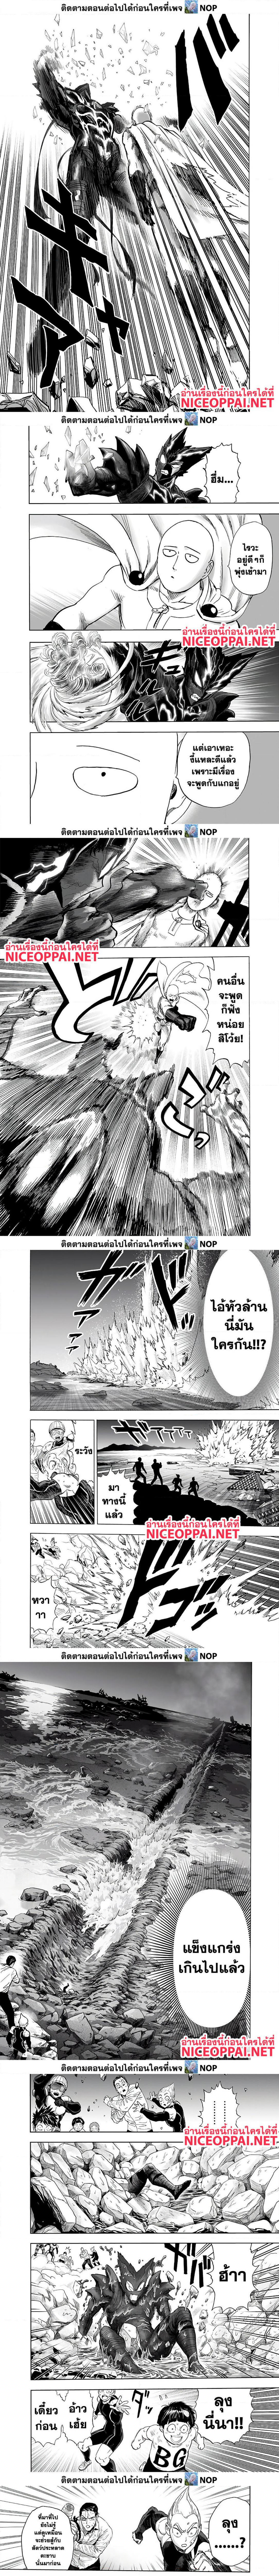 One Punch Man 162 (3)